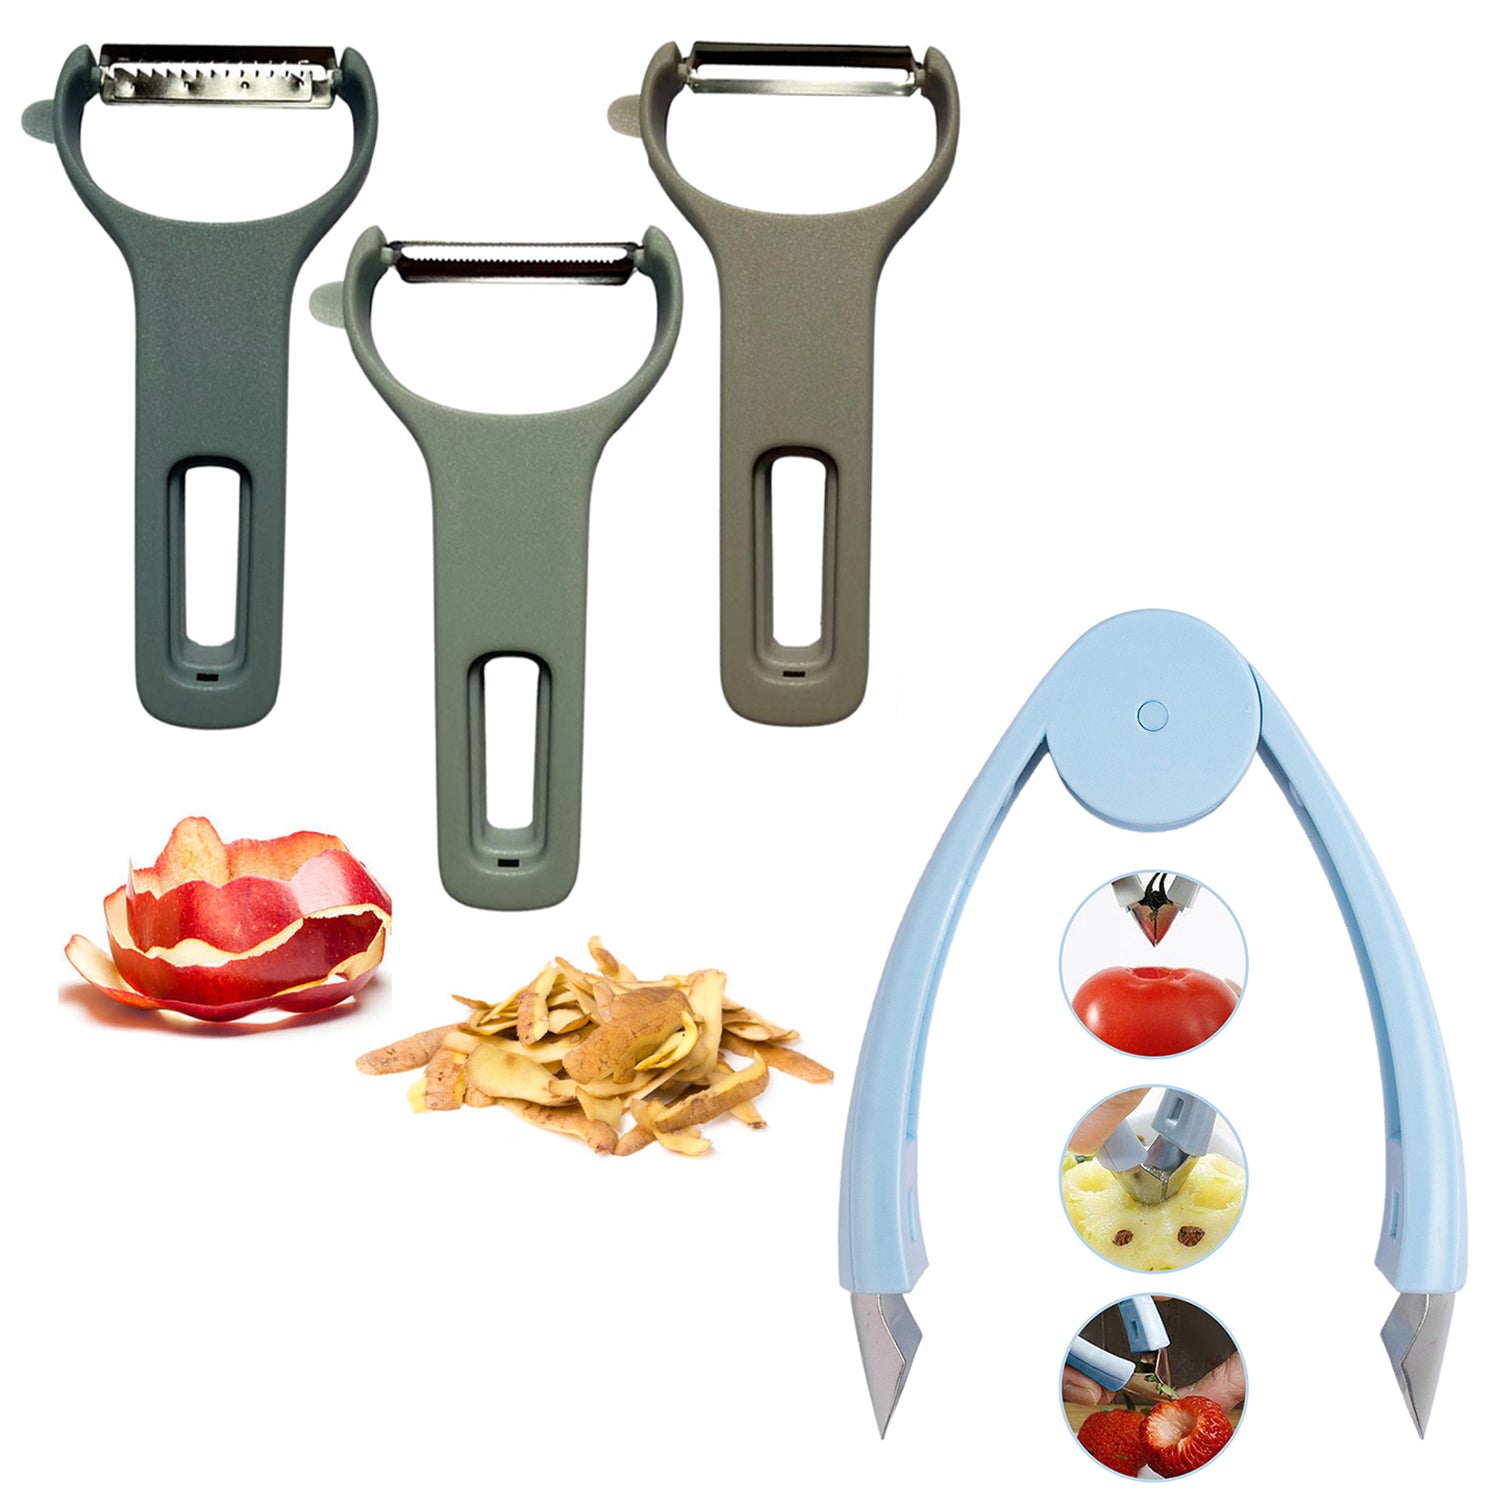 4-Pack: Fruit And Vegetable Stem Remover Strawberry Tomato Potato Pineapple Carrot Huller Corer And Fruits Vegetable Stainless Peelers